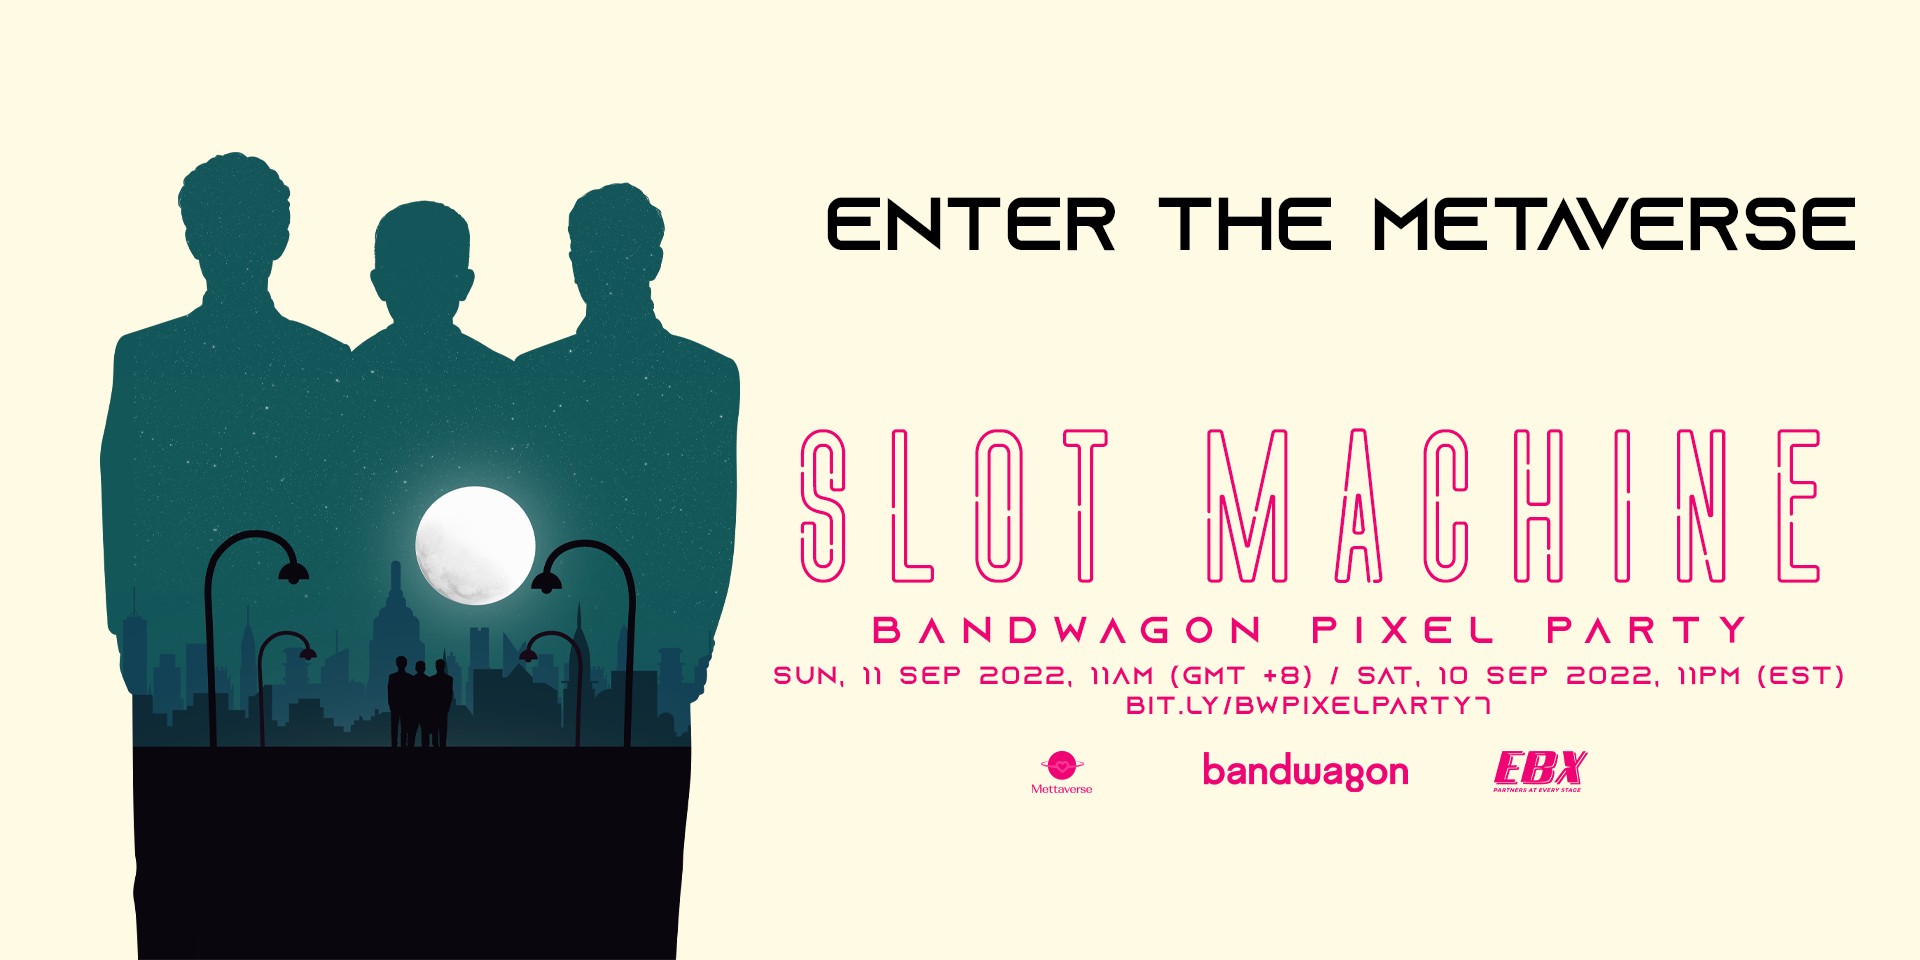 Slot Machine to hold metaverse concert at Bandwagon Pixel Party, here's everything you need to know